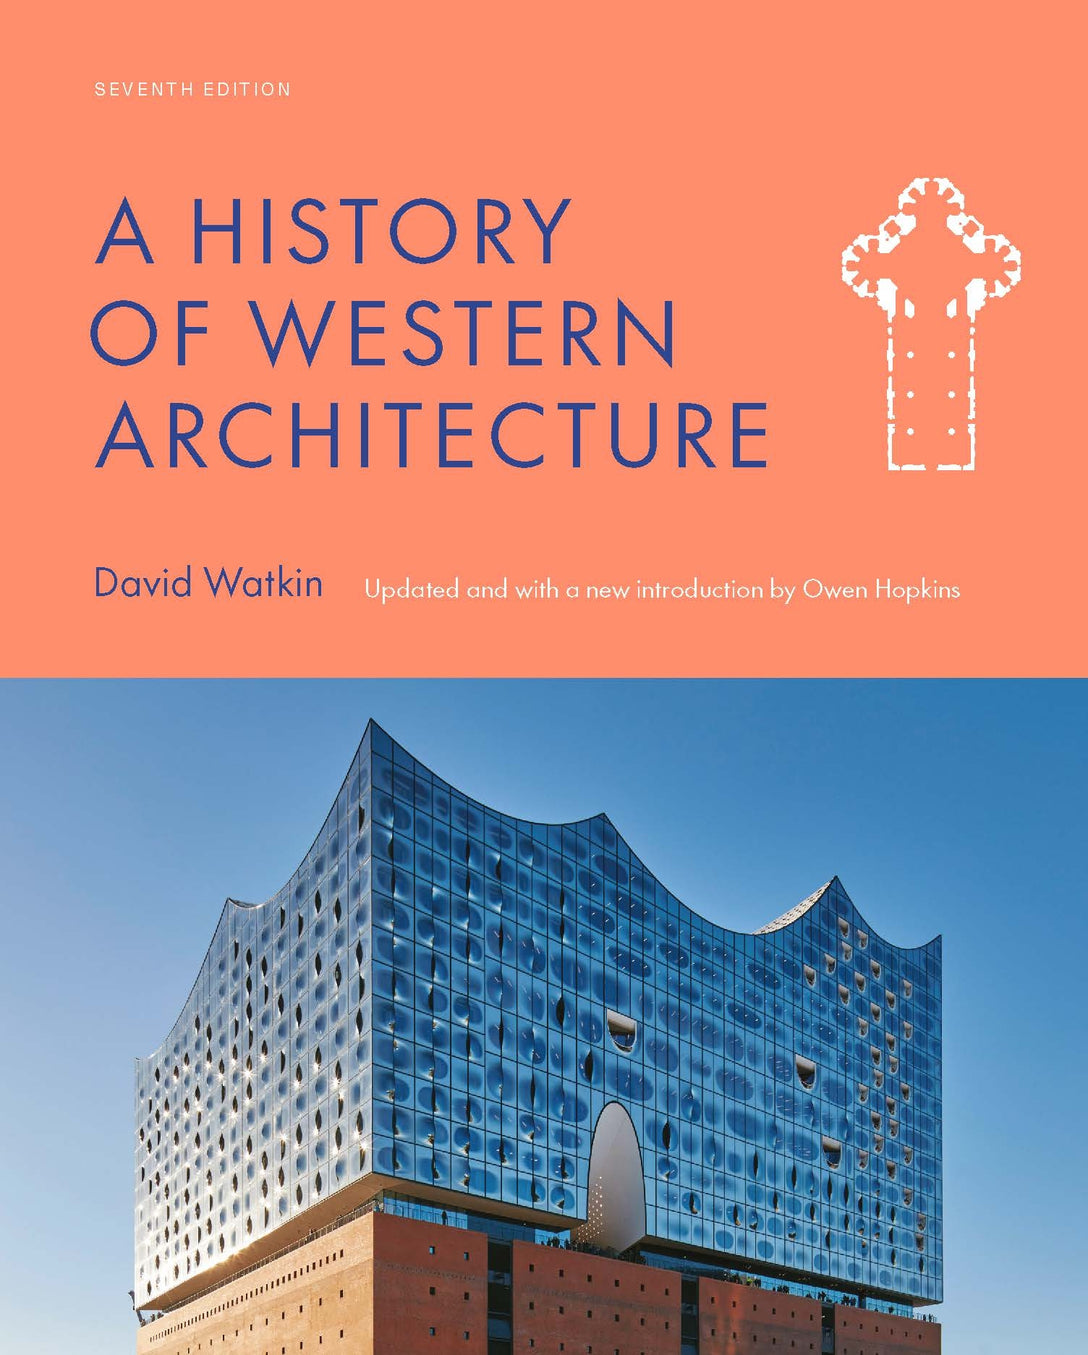 A History of Western Architecture Seventh Edition by David Watkin, Owen Hopkins